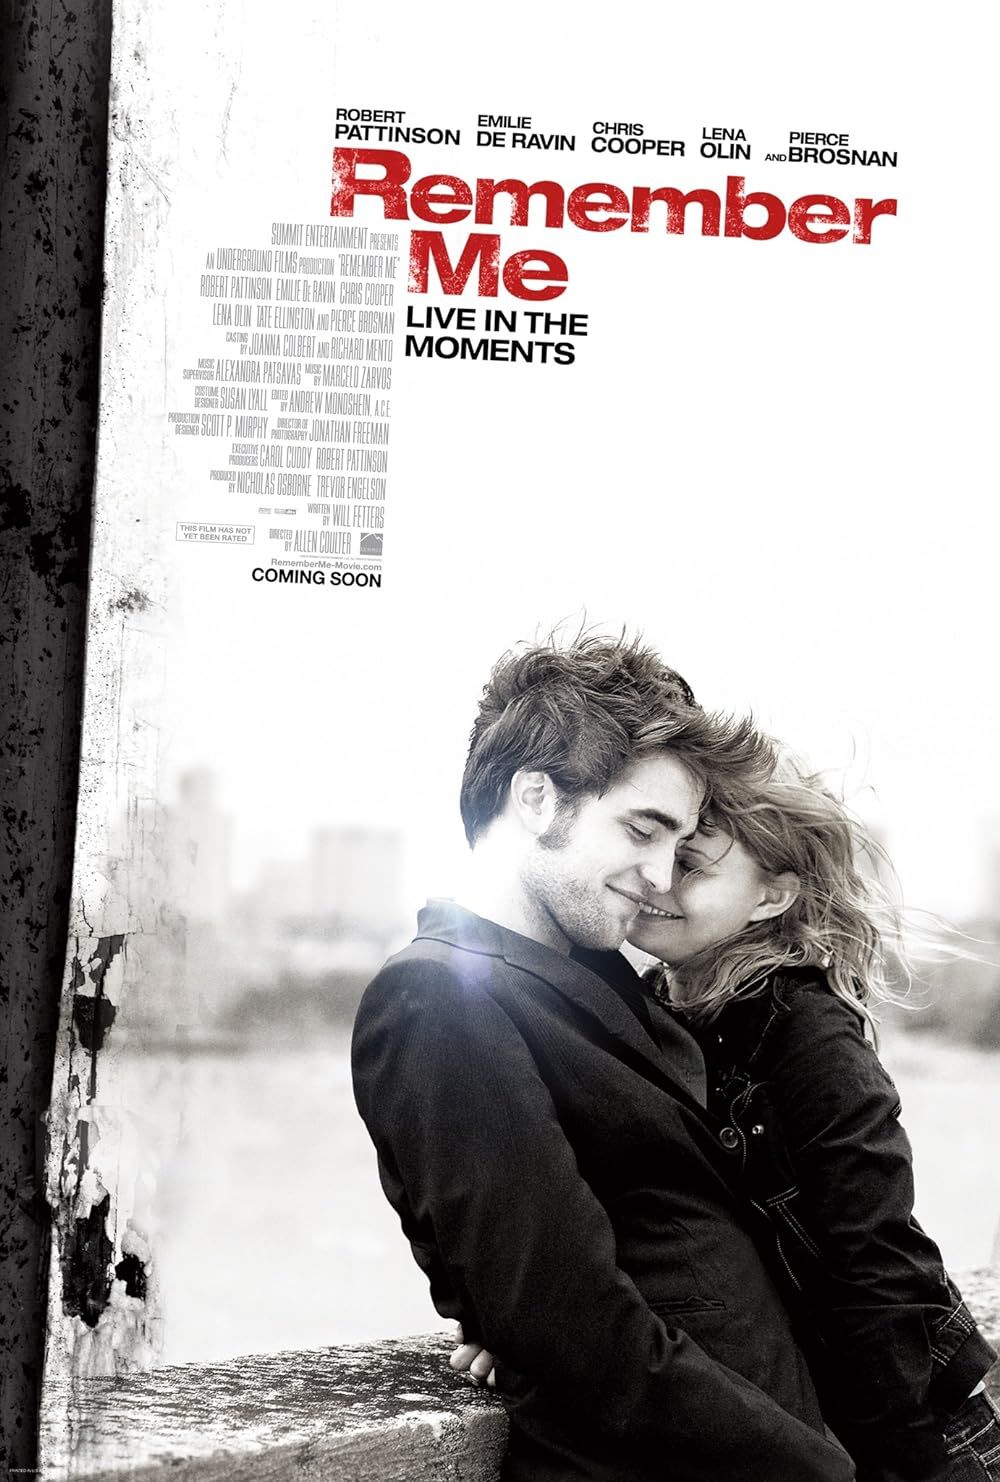 Robert Pattinson and Emilie De Ravin embrace in the poster of Remember Me